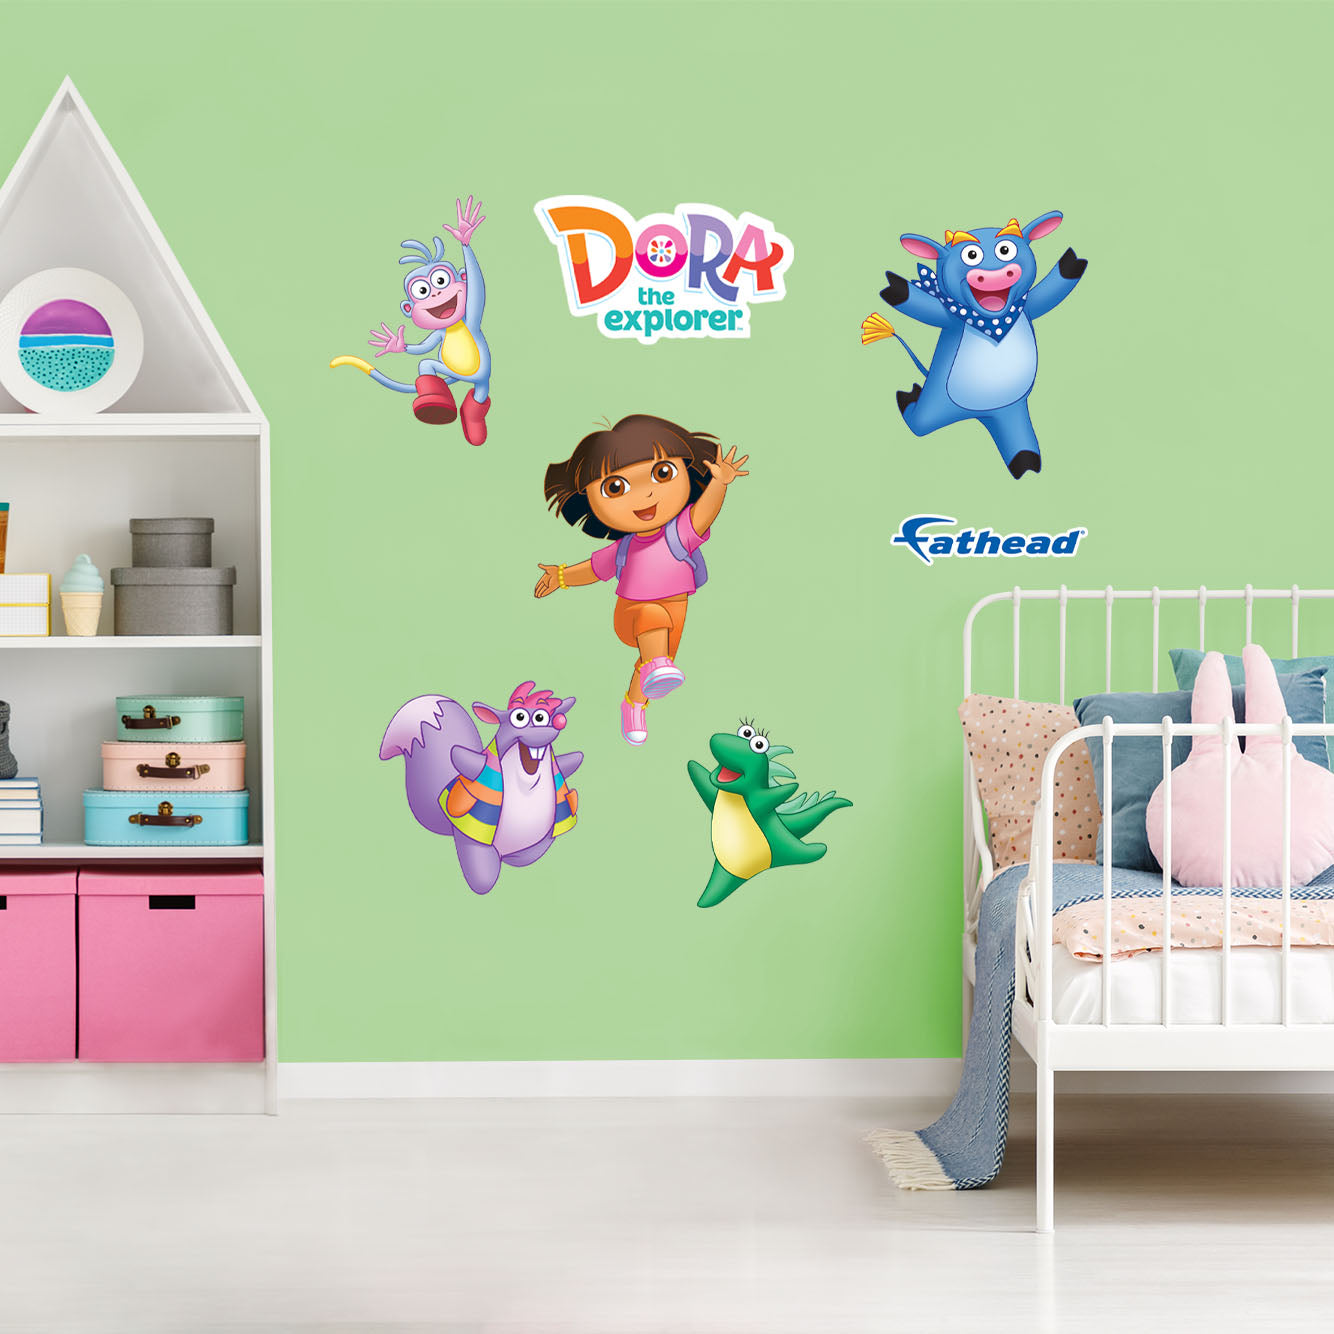 Dora the Explorer: Dora and Friends RealBig - Officially Licensed Nickelodeon Removable Adhesive Decal